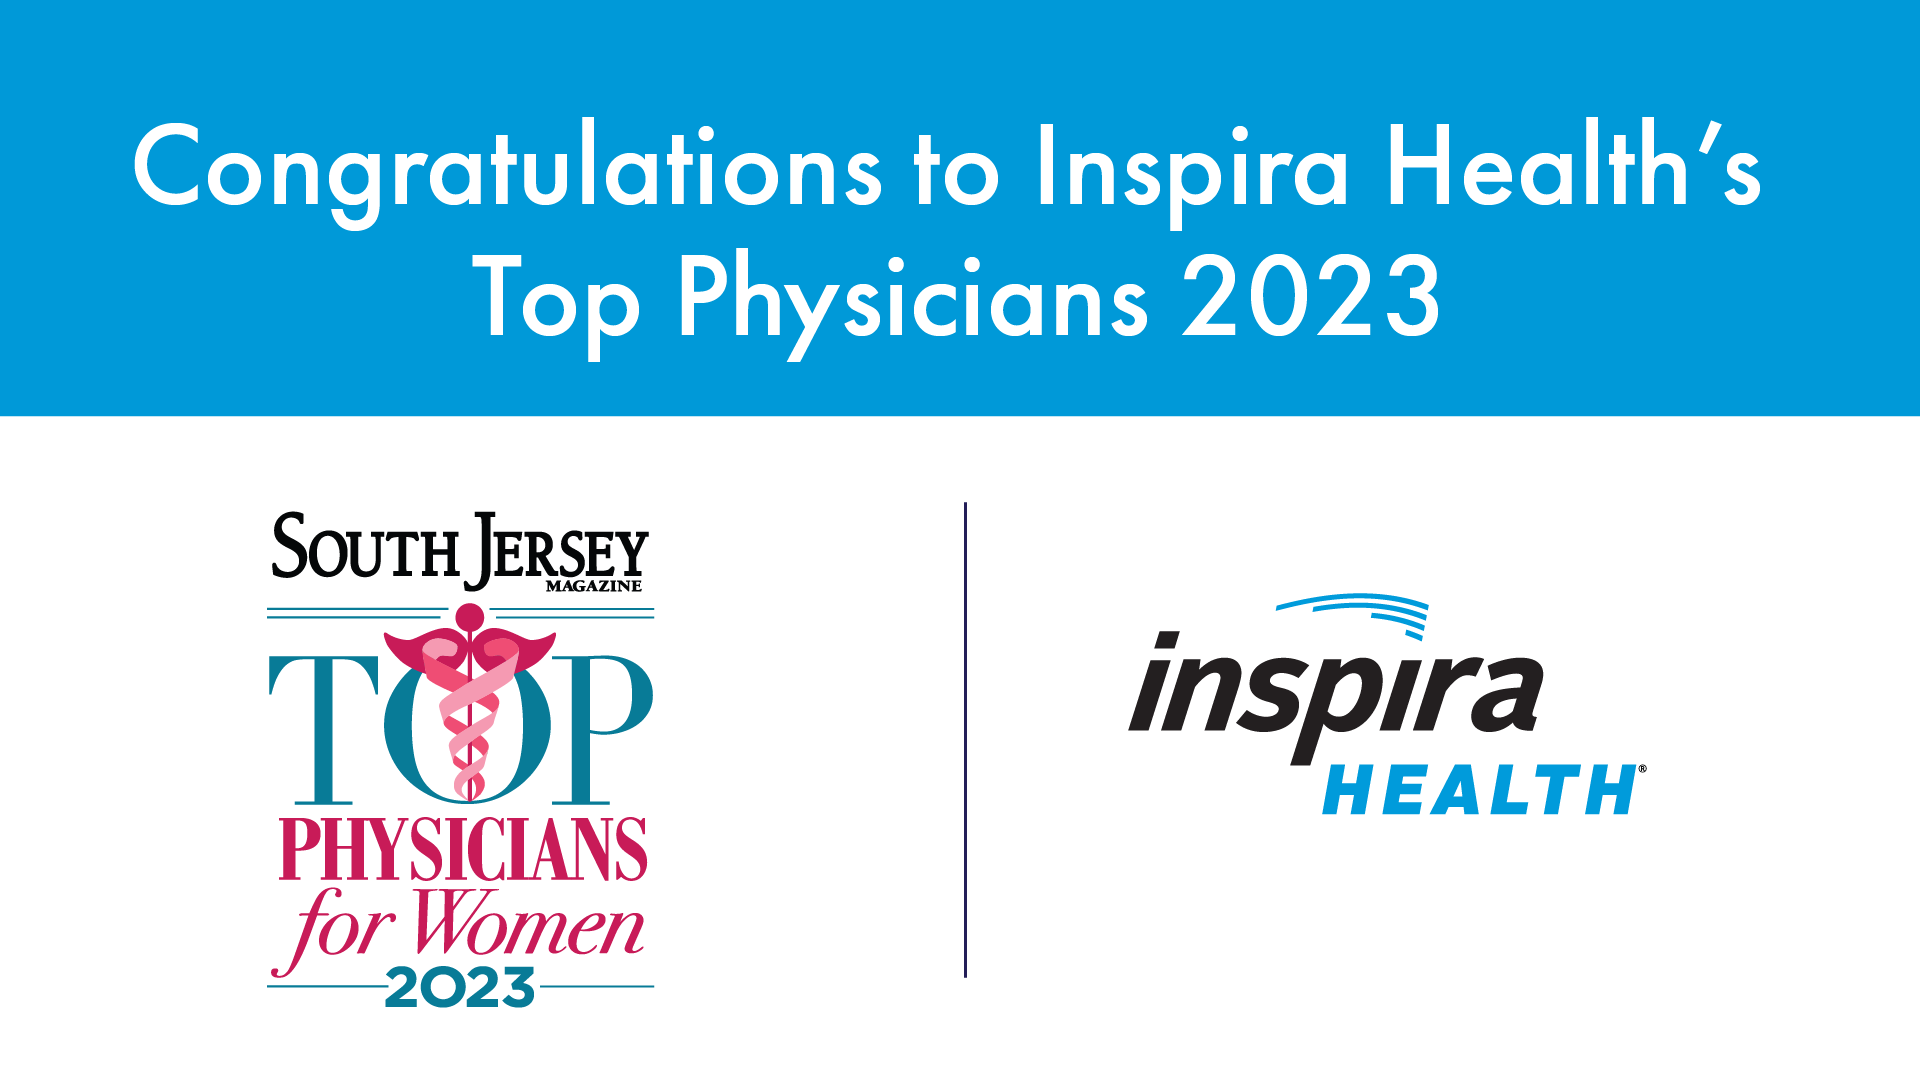 South Jersey Magazine: Top Physicians for Women 2023